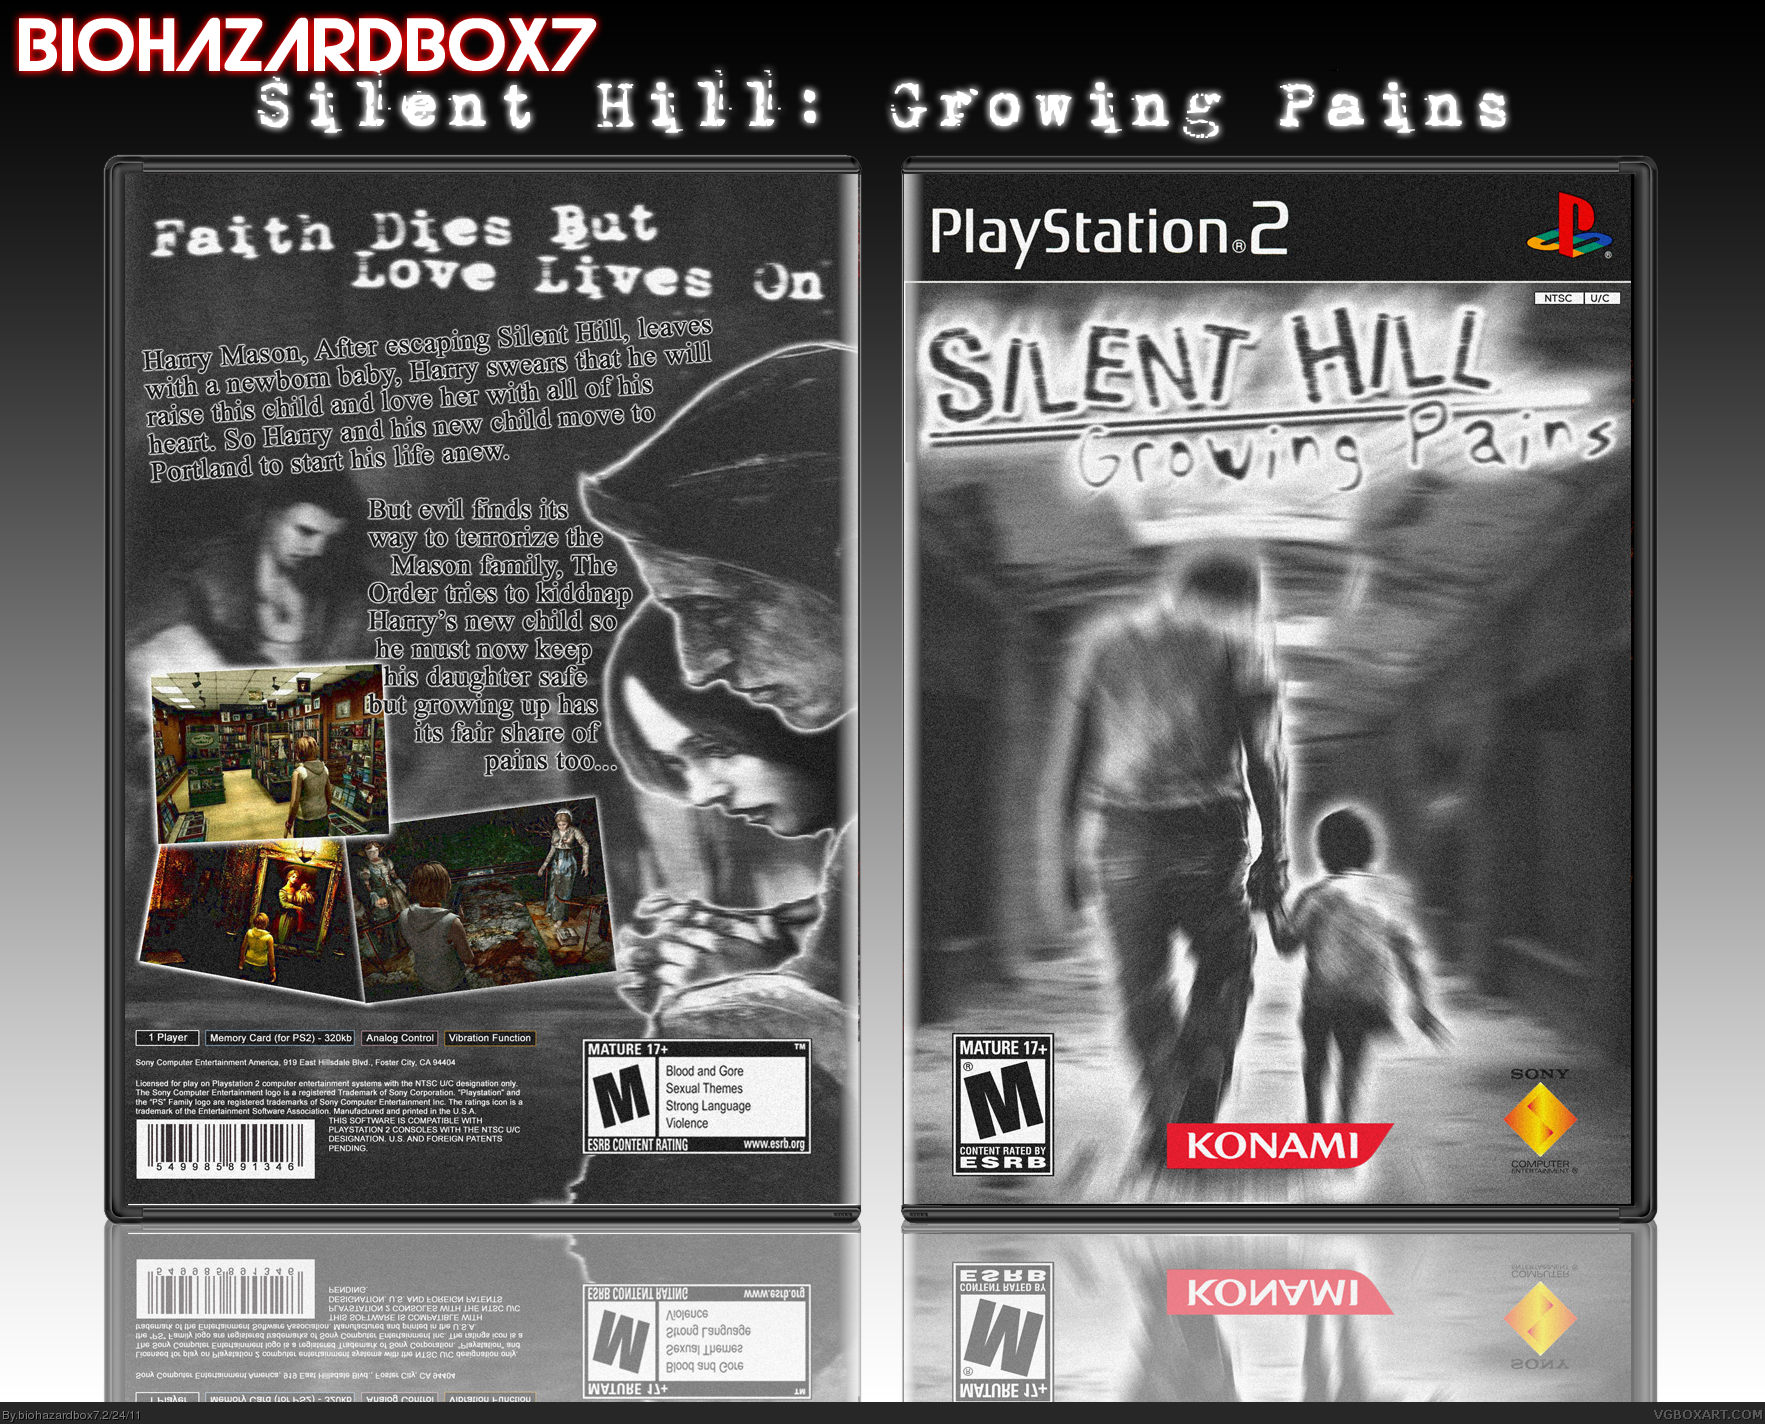 Silent Hill: Growing Pains box cover